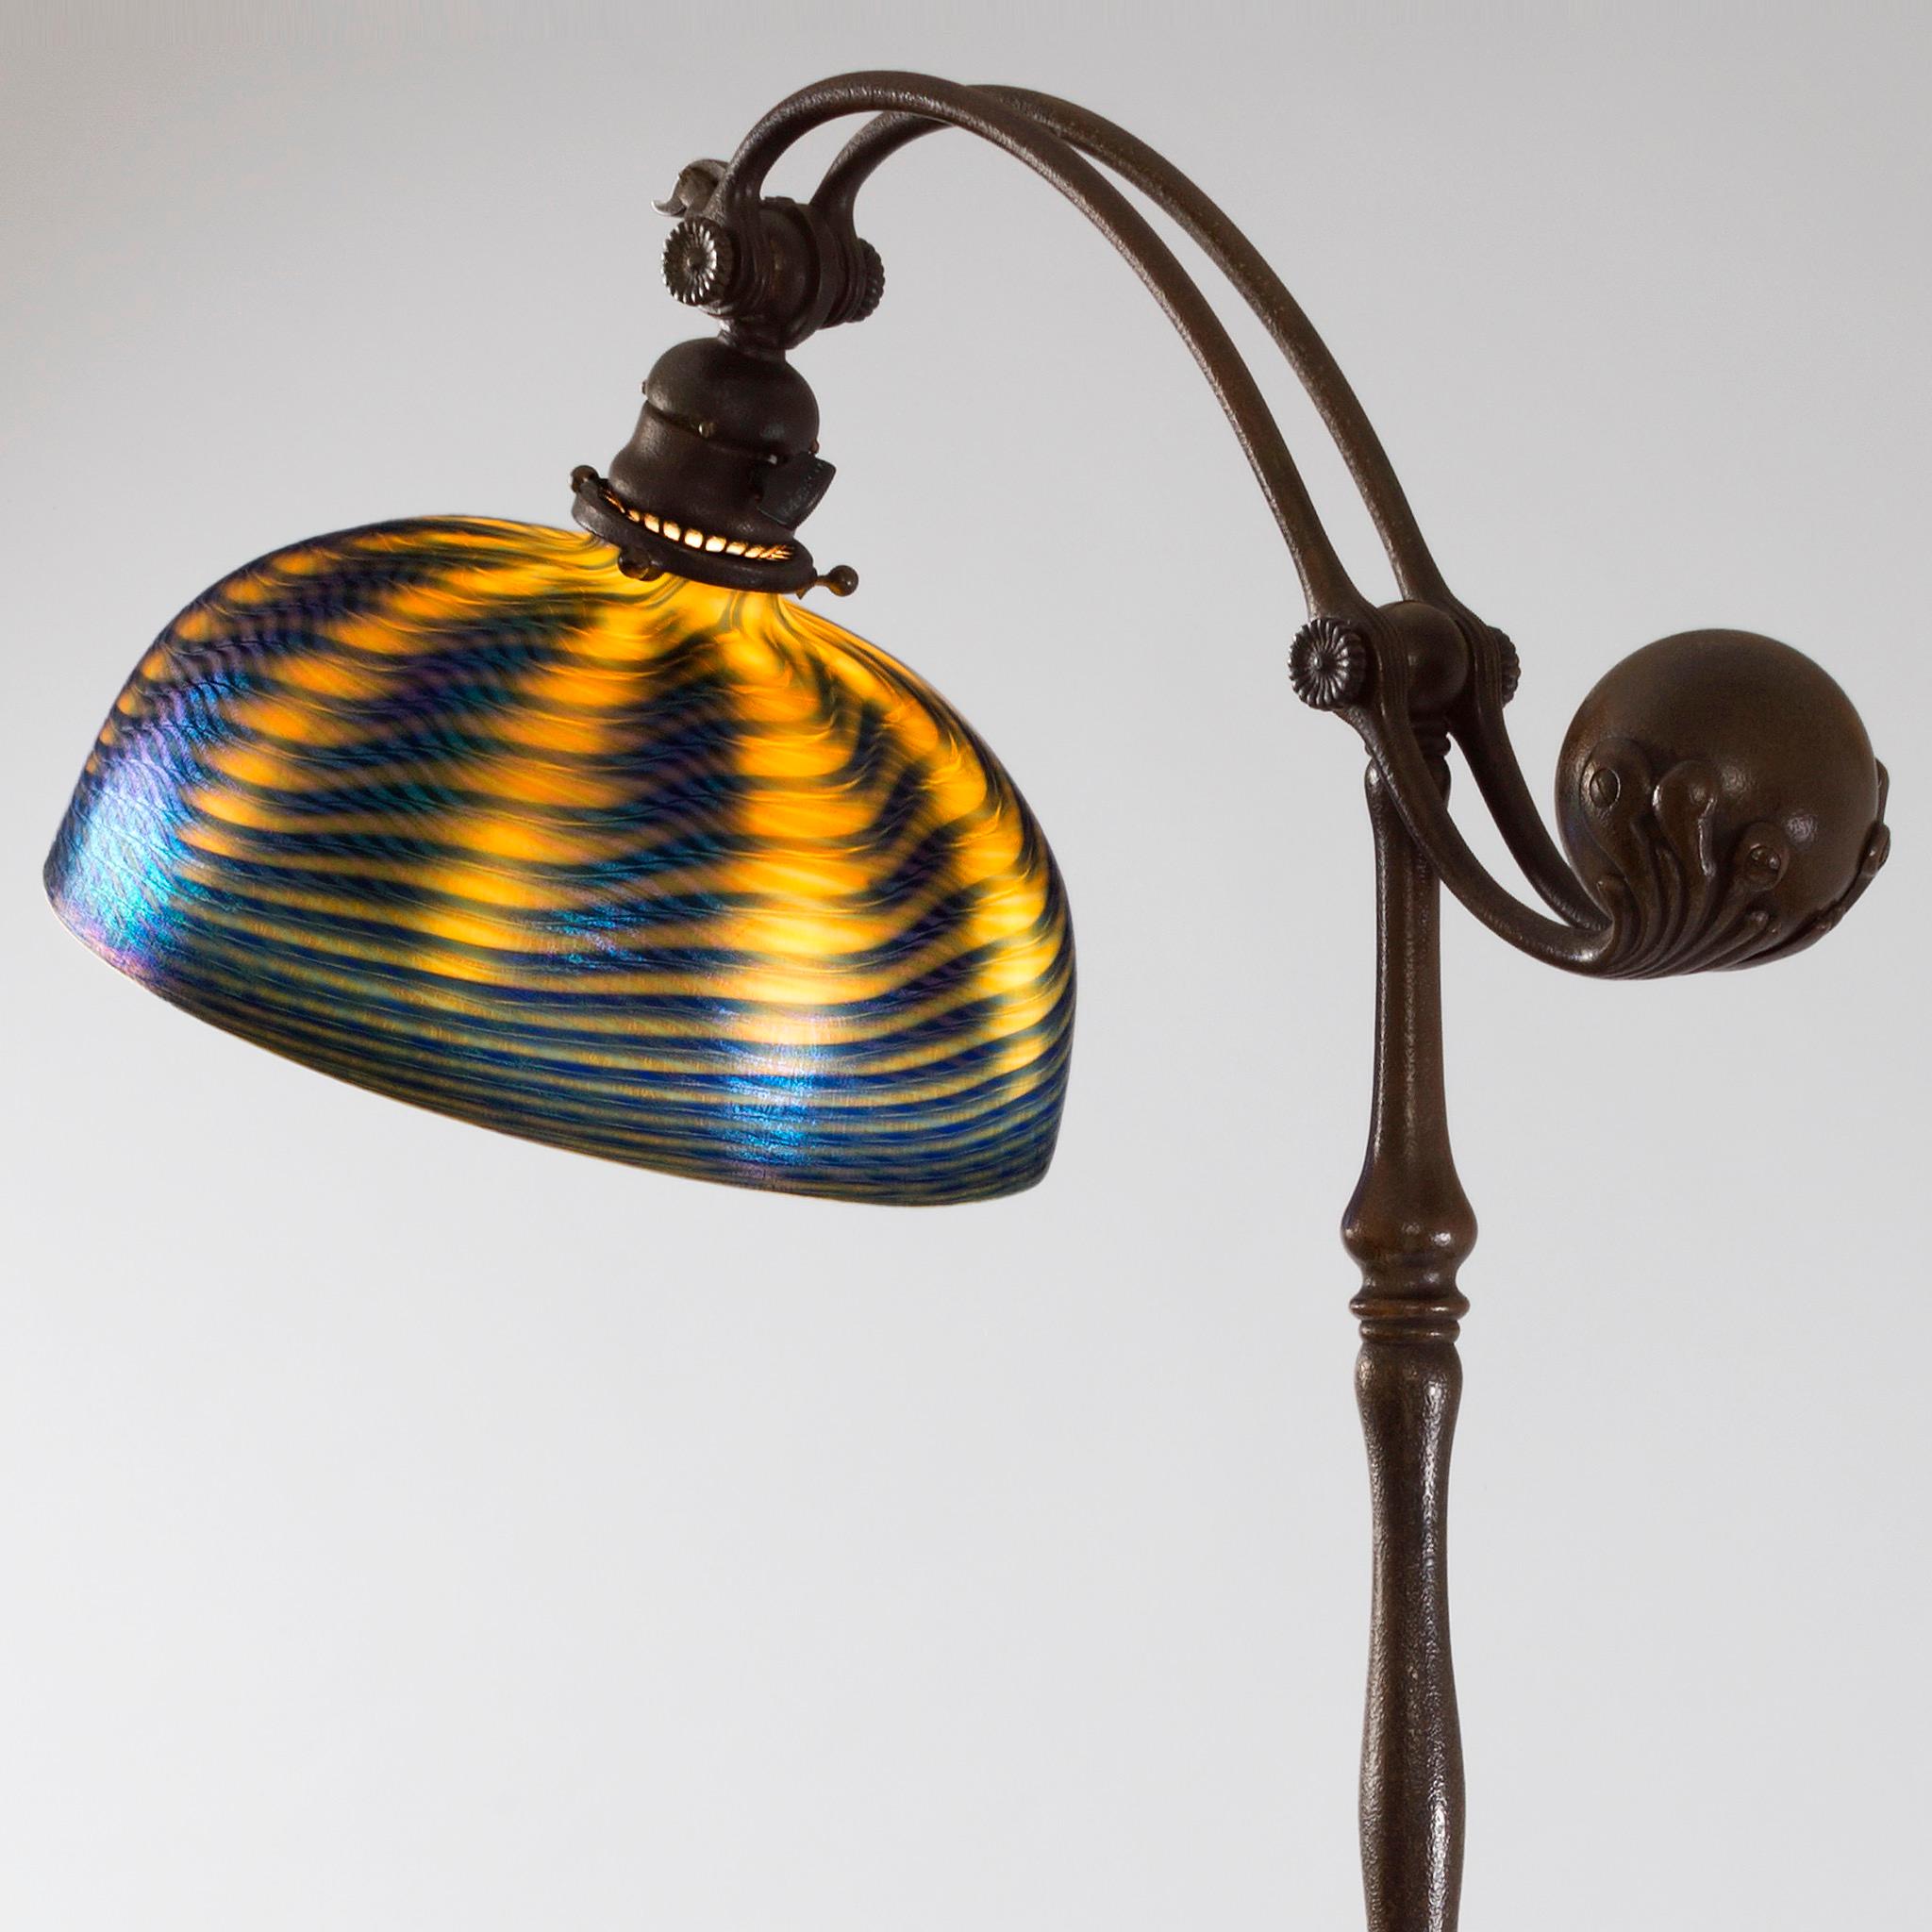 This Tiffany Studios New York glass and bronze floor lamp, features a shimmering twisted midnight blue and amber 